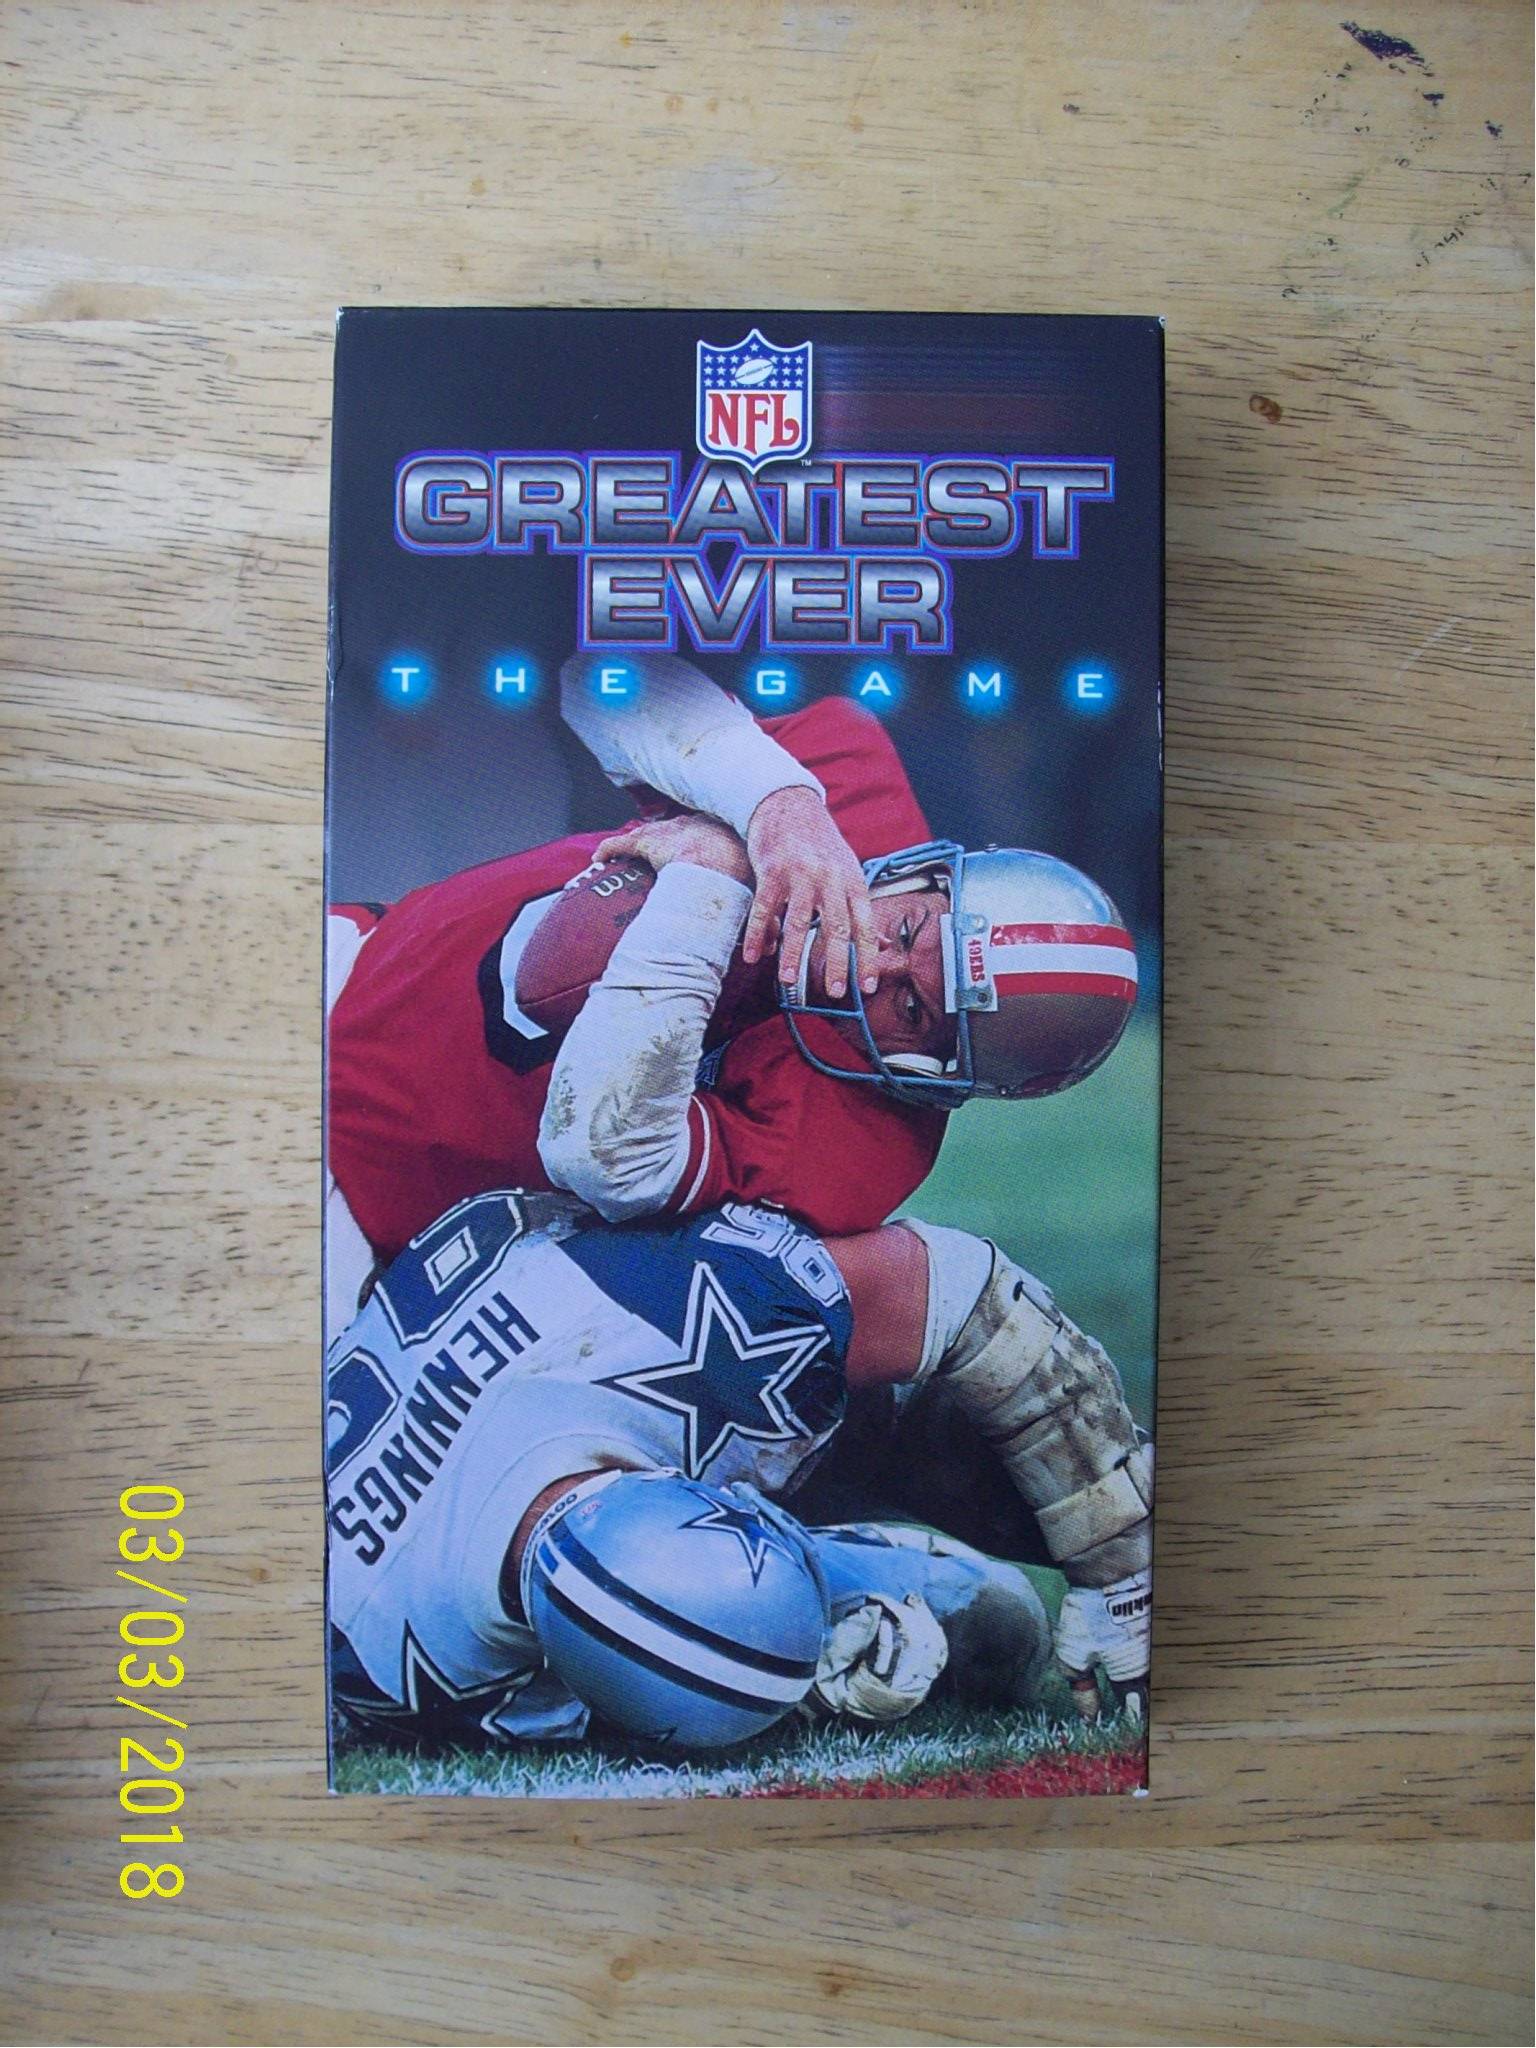 Greatest Ever NFL's Series Box Set Volumes 1-3 VHS